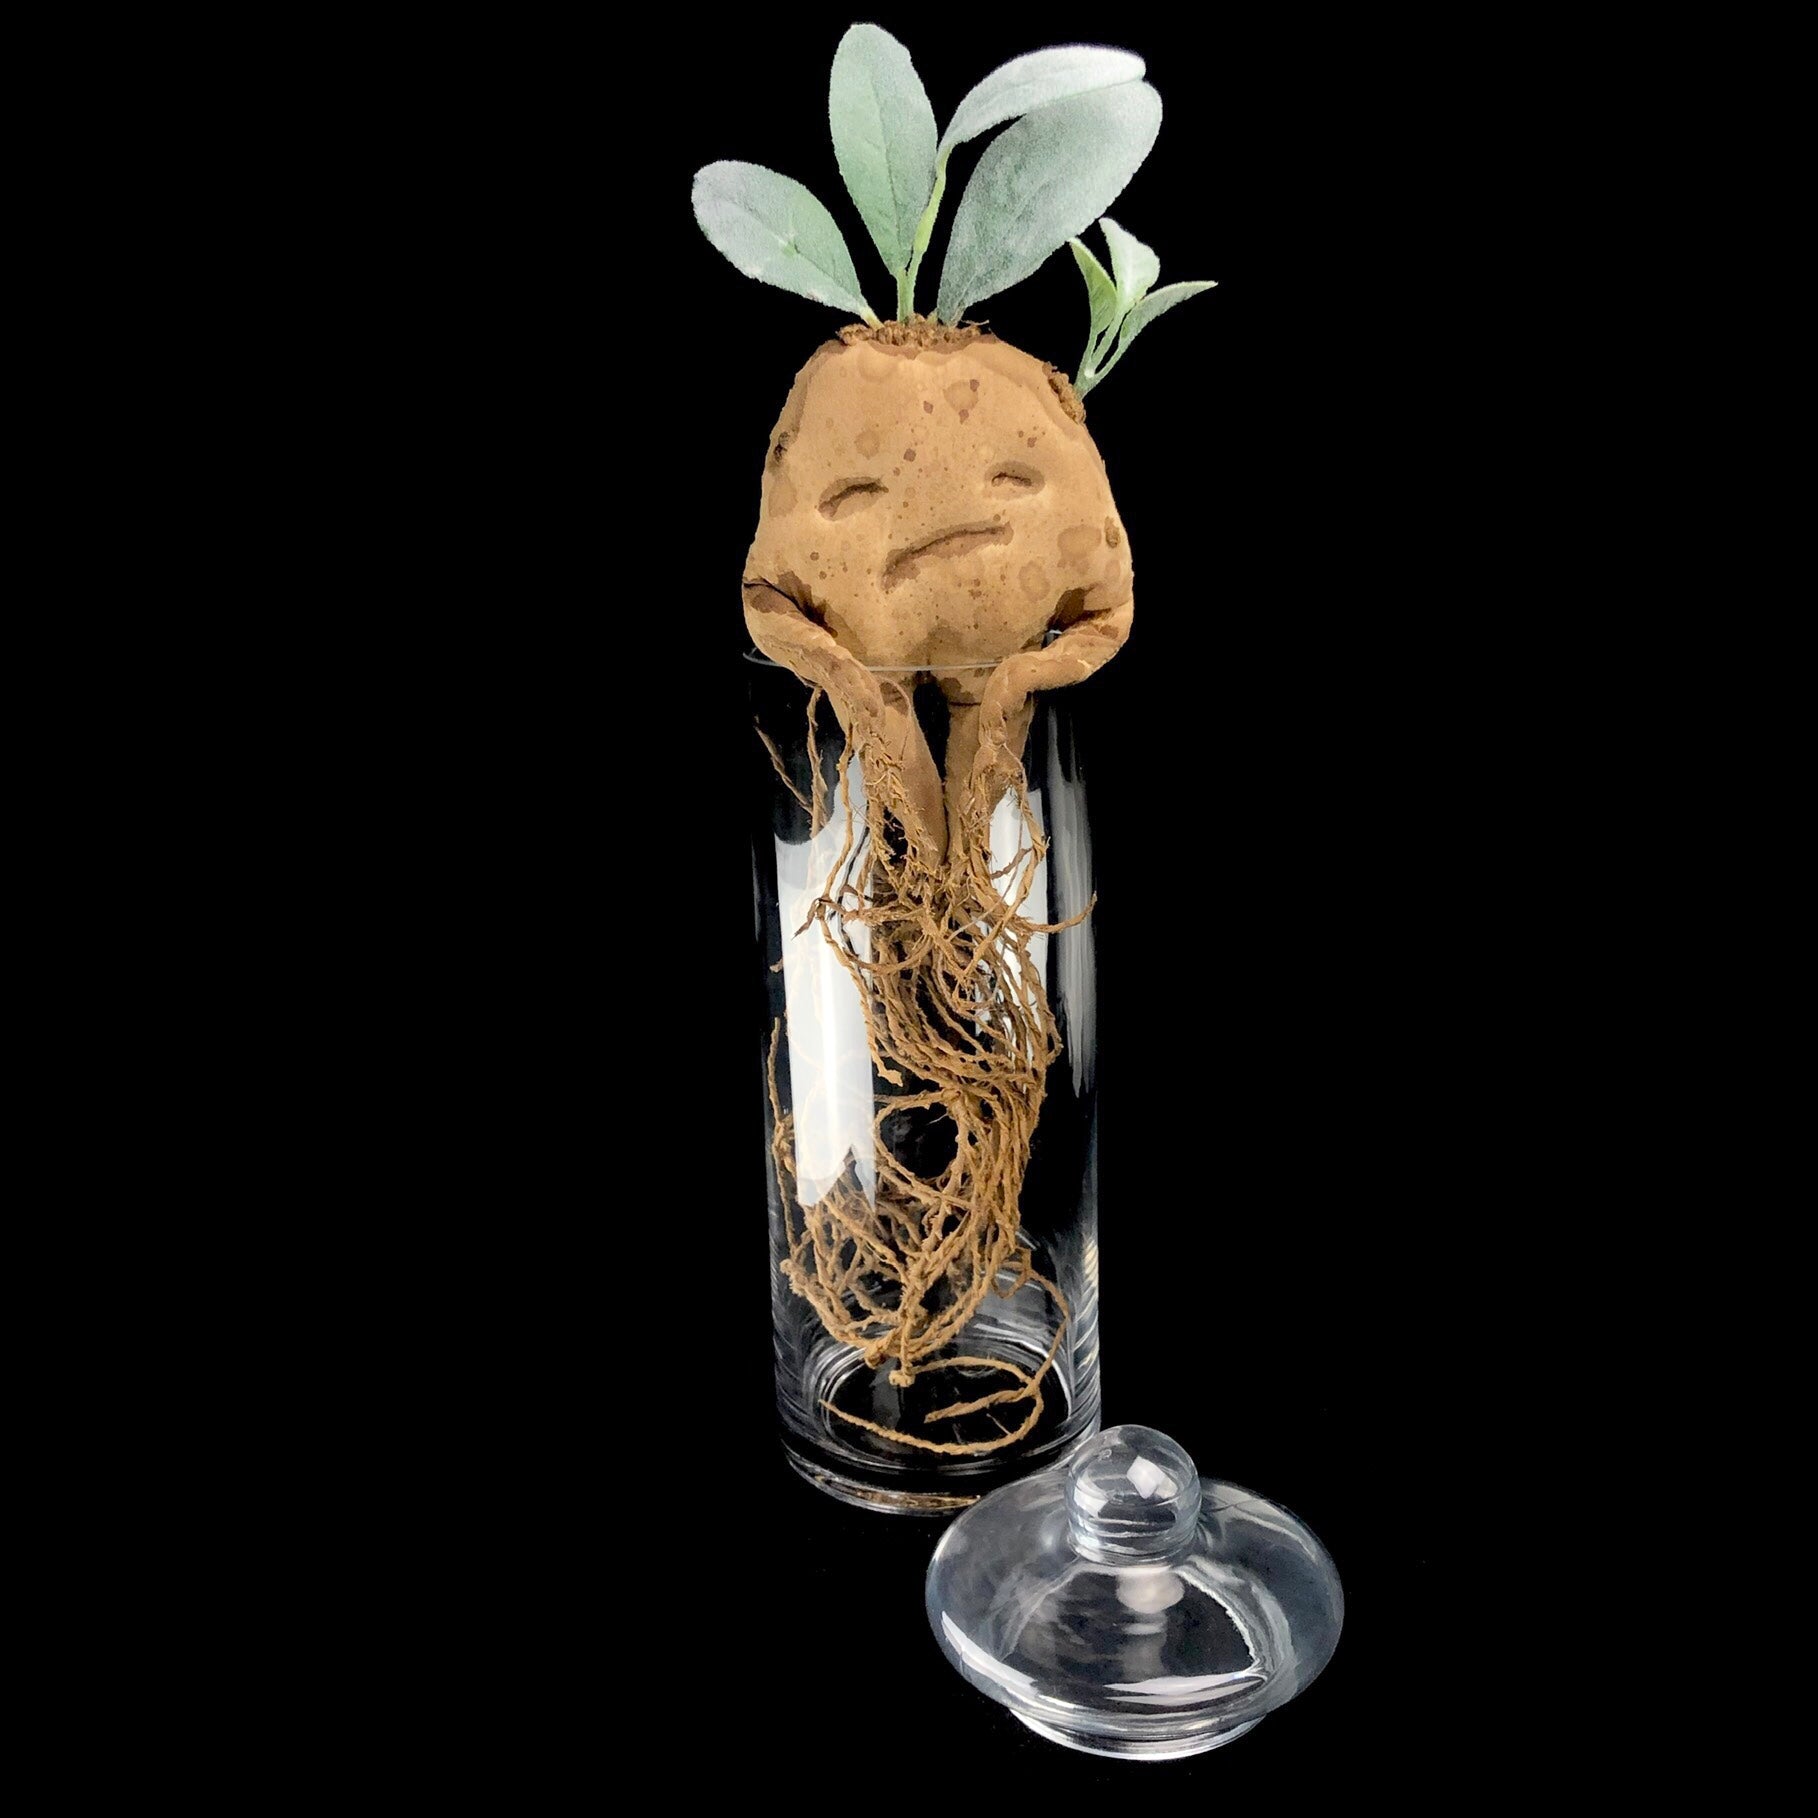 Brown rootlike creature with green leaves on its head in glass jar 